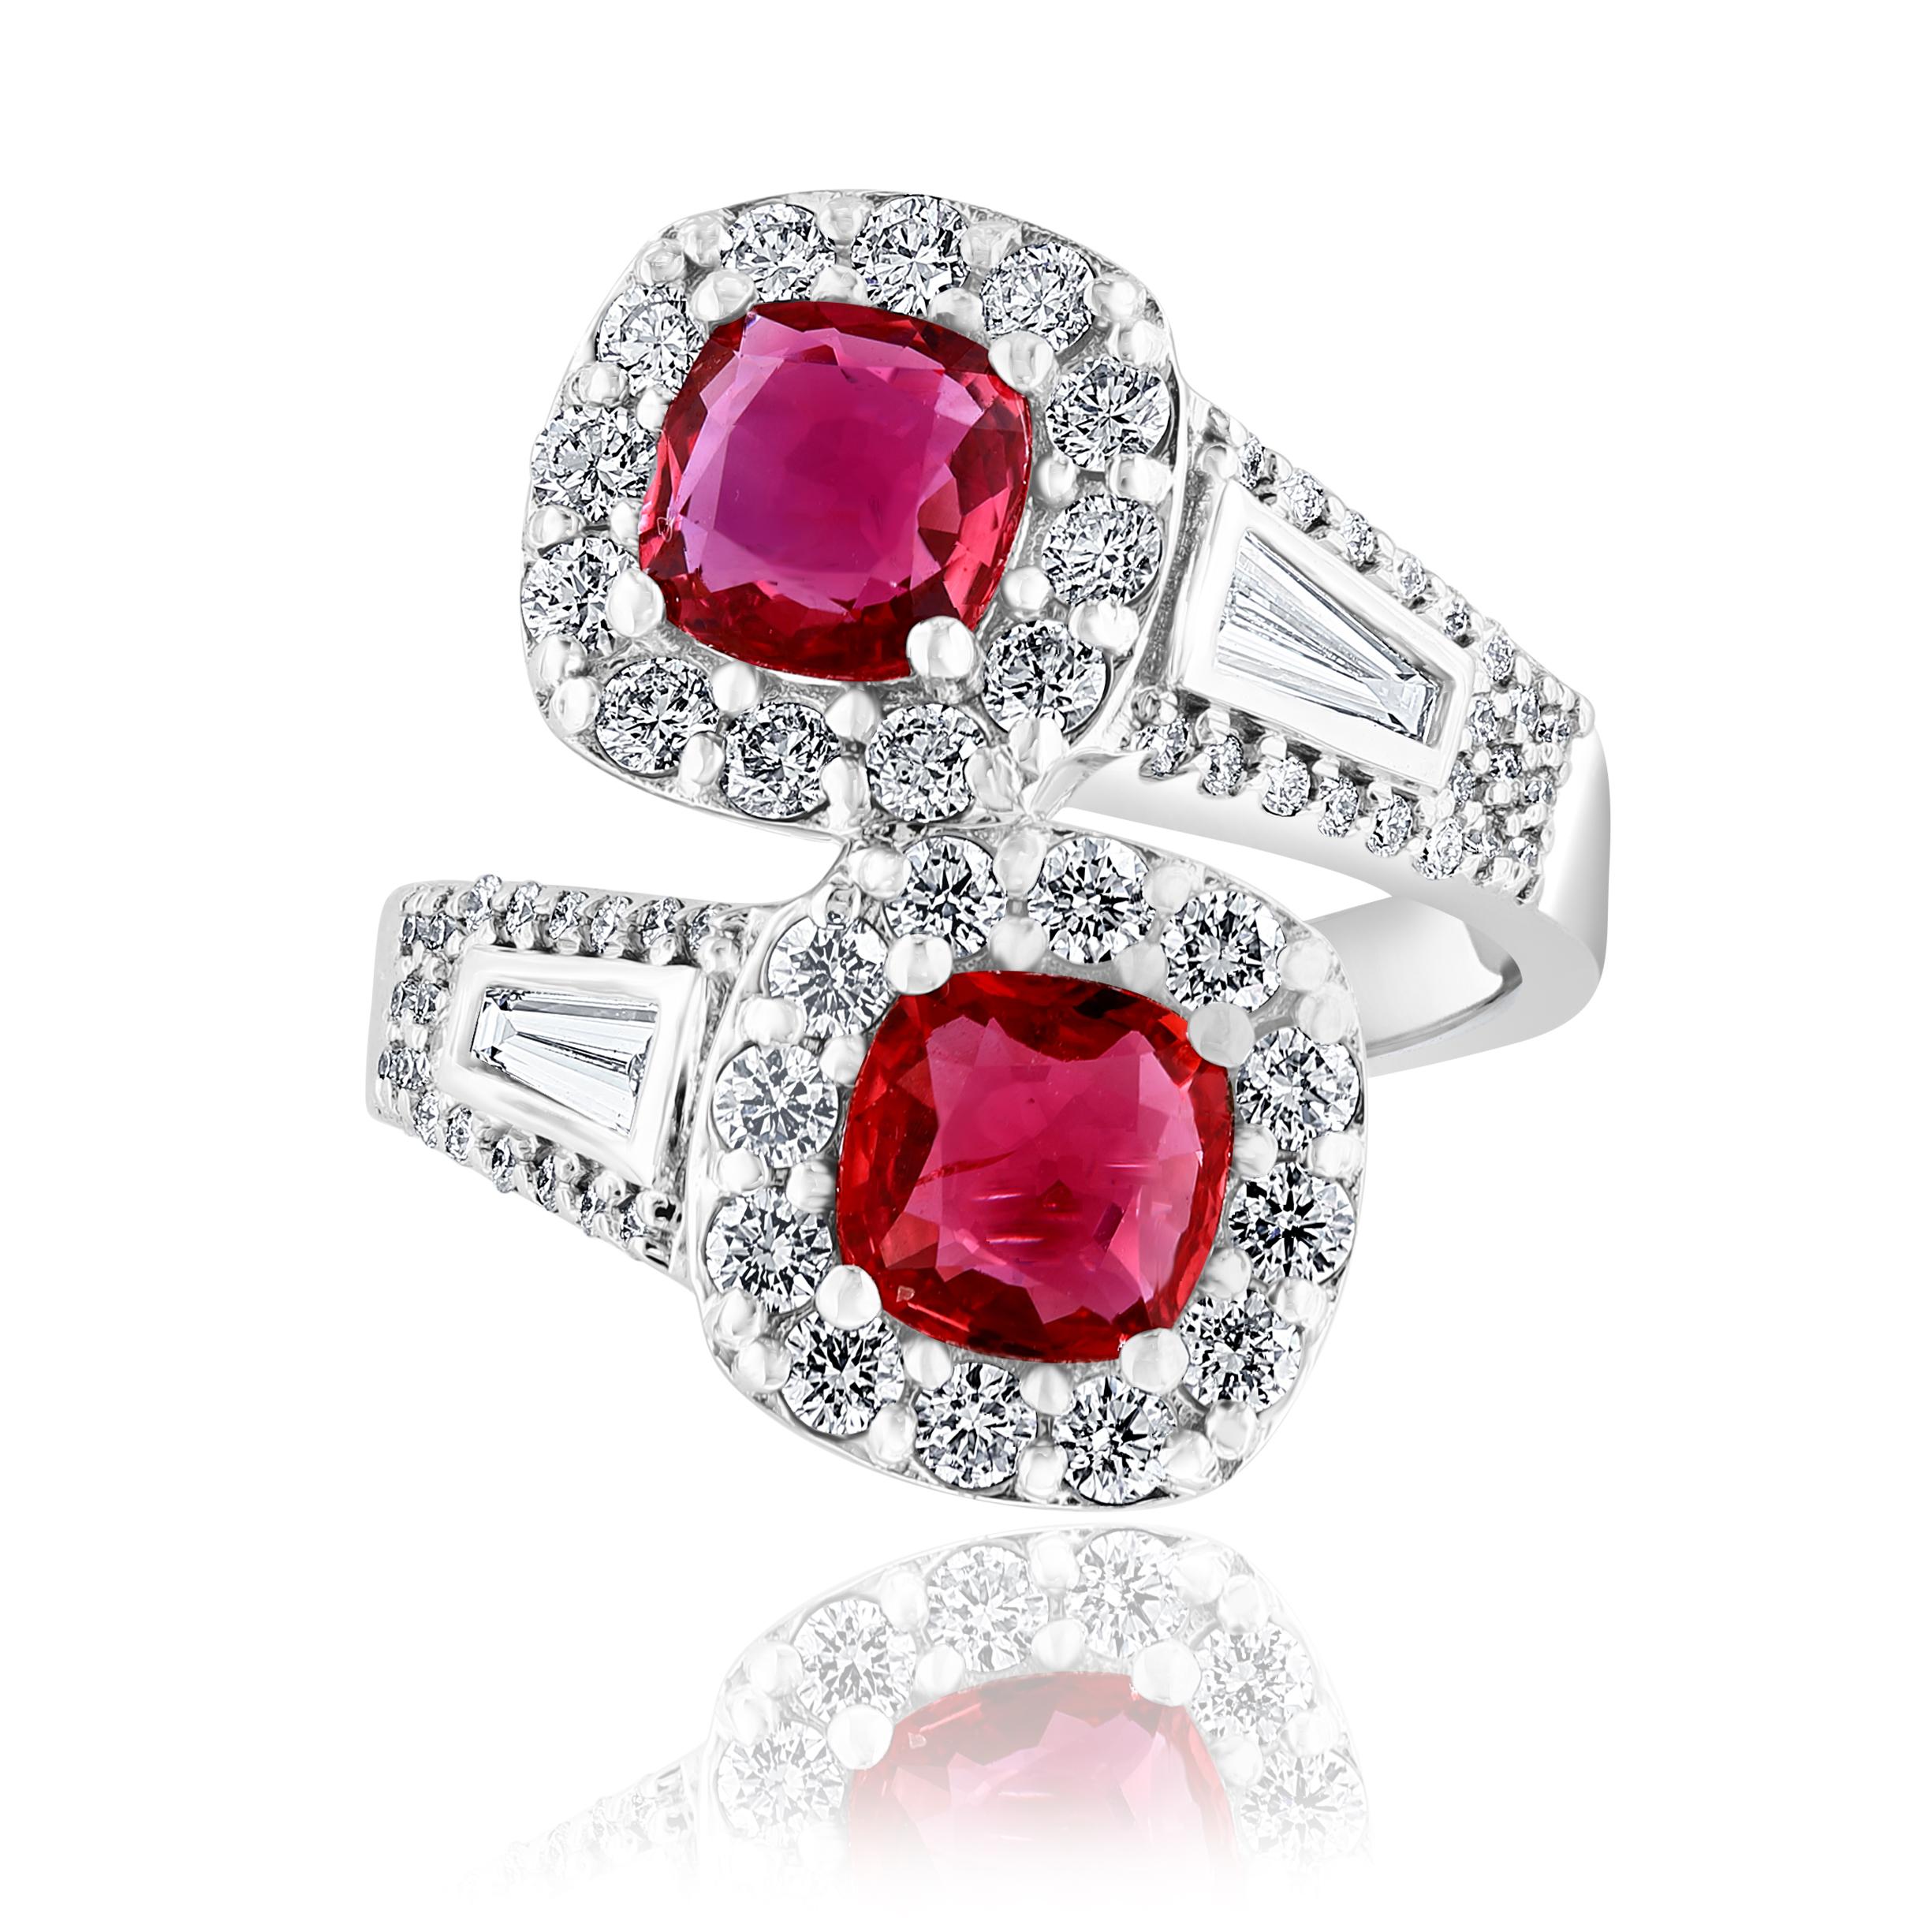 Exquisite 2 Stone Bypass Halo Ring with 2 Cushion Cut natural Rubies and 2 Tapered Baguette Diamonds surrounded by 86 round brilliant diamonds around the halo and down the sides. Rubies weigh 2.04 carats and  Diamonds weigh 0.88 carats